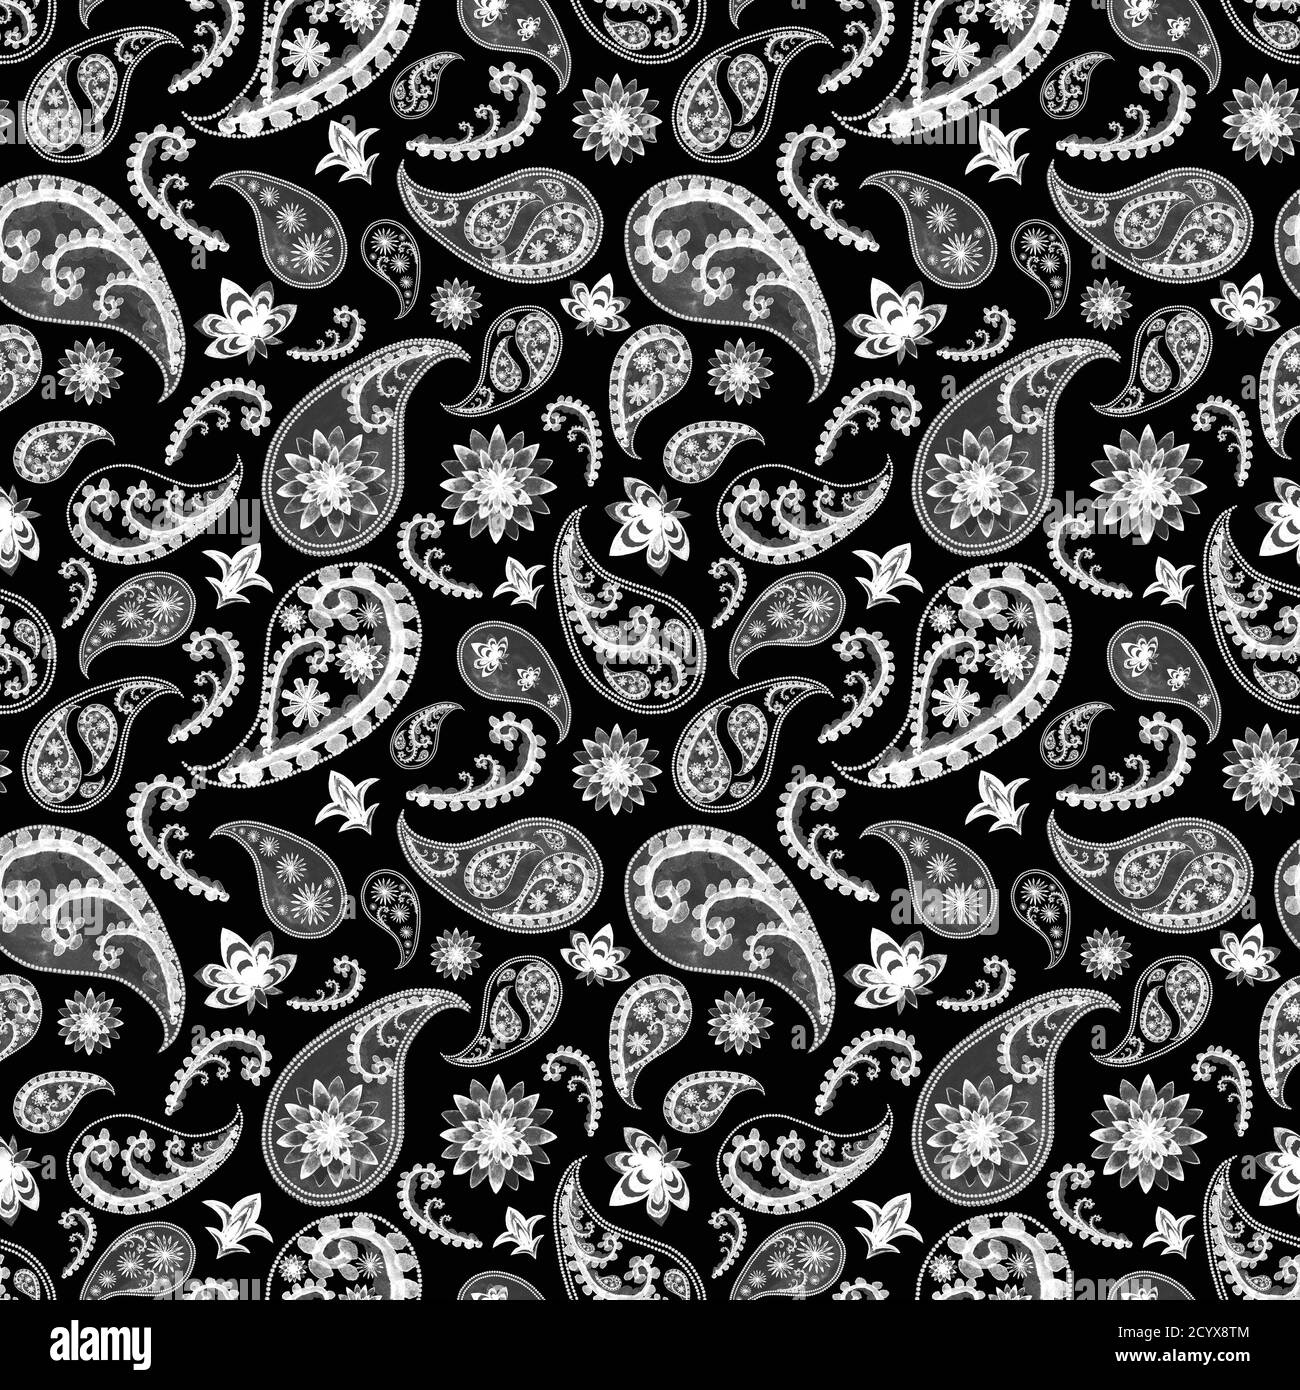 Black and white paisley oriental floral abstract vintage seamless ...